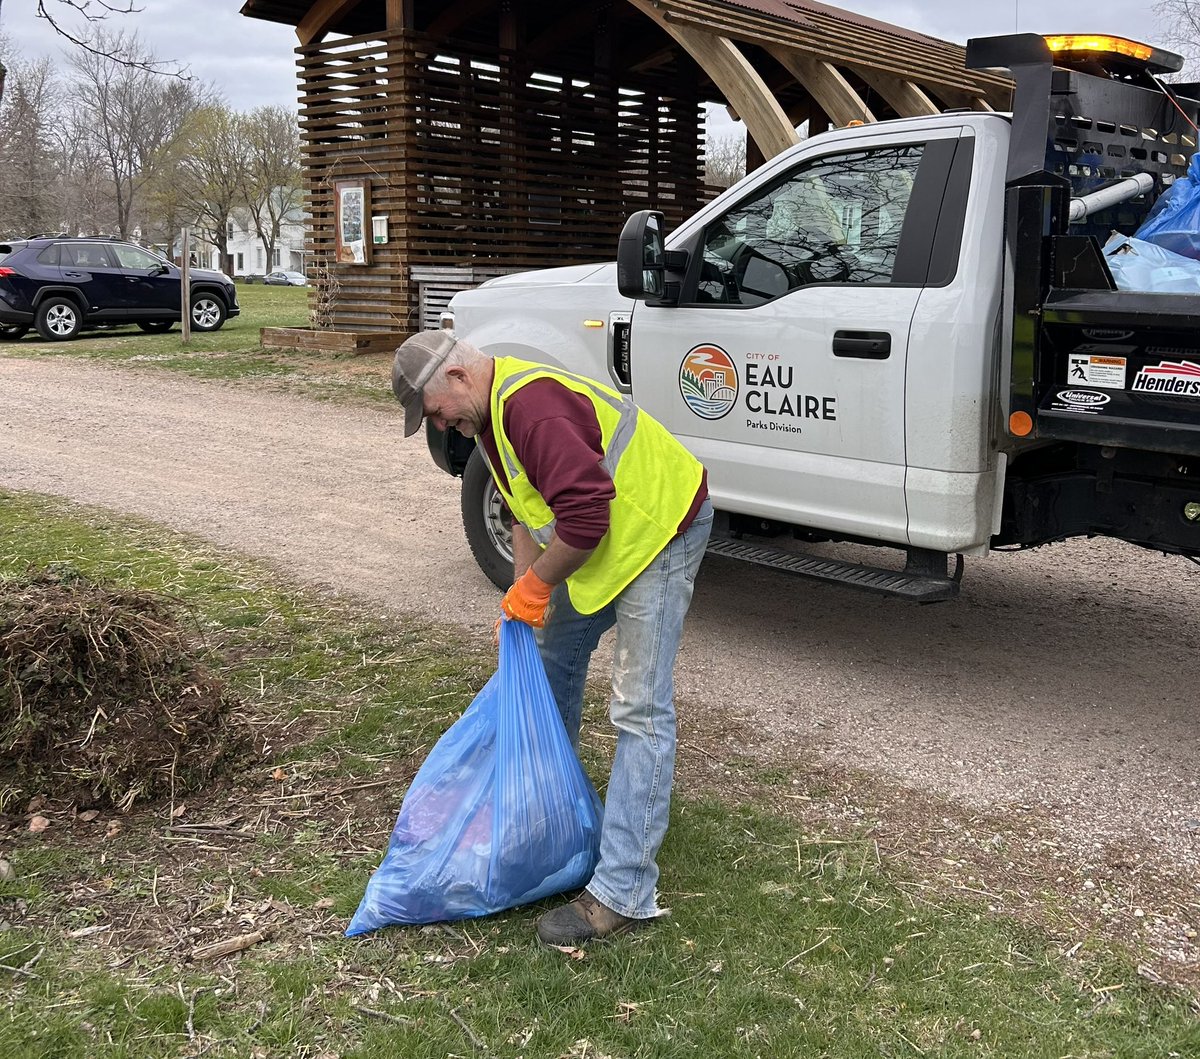 Eau Claire, WI rocks! Yesterday, 1,500 people came out for the Amazing Eau Claire Clean Up! Collecting trash, planting flower beds, giving our community love. Thank you everyone who made it out and to the City of Eau Claire staff like Brian who supported the cleanup effort!